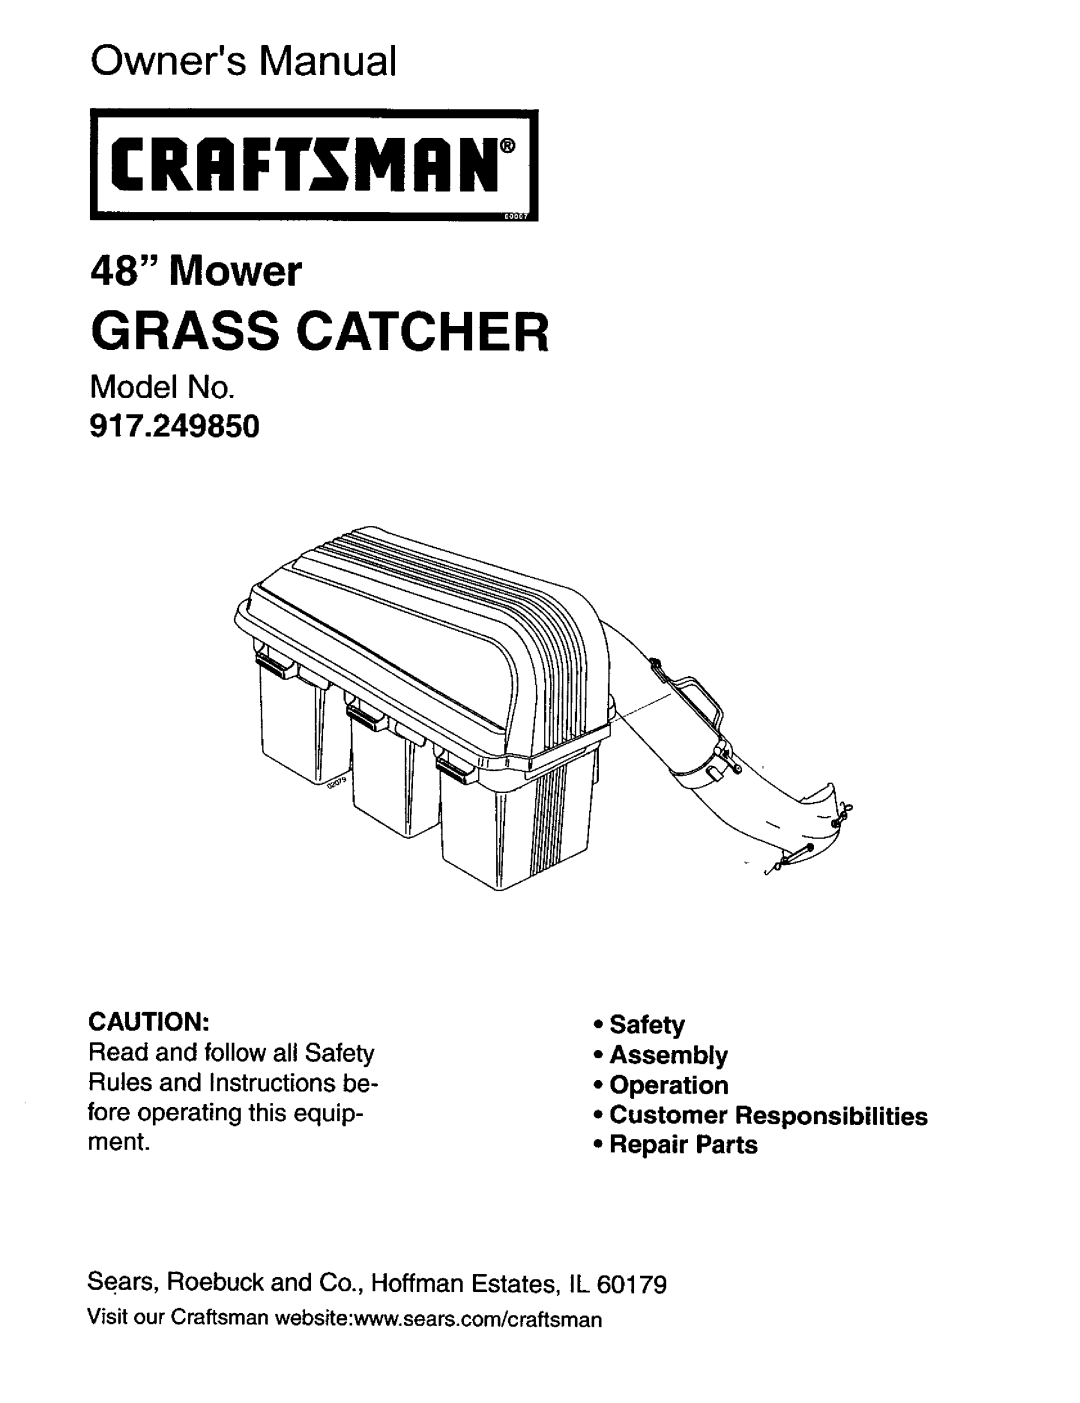 Craftsman 917.24985 owner manual Assembly Operation Customer Responsibilities, •Repair Parts, Grass Catcher, Owners Manual 